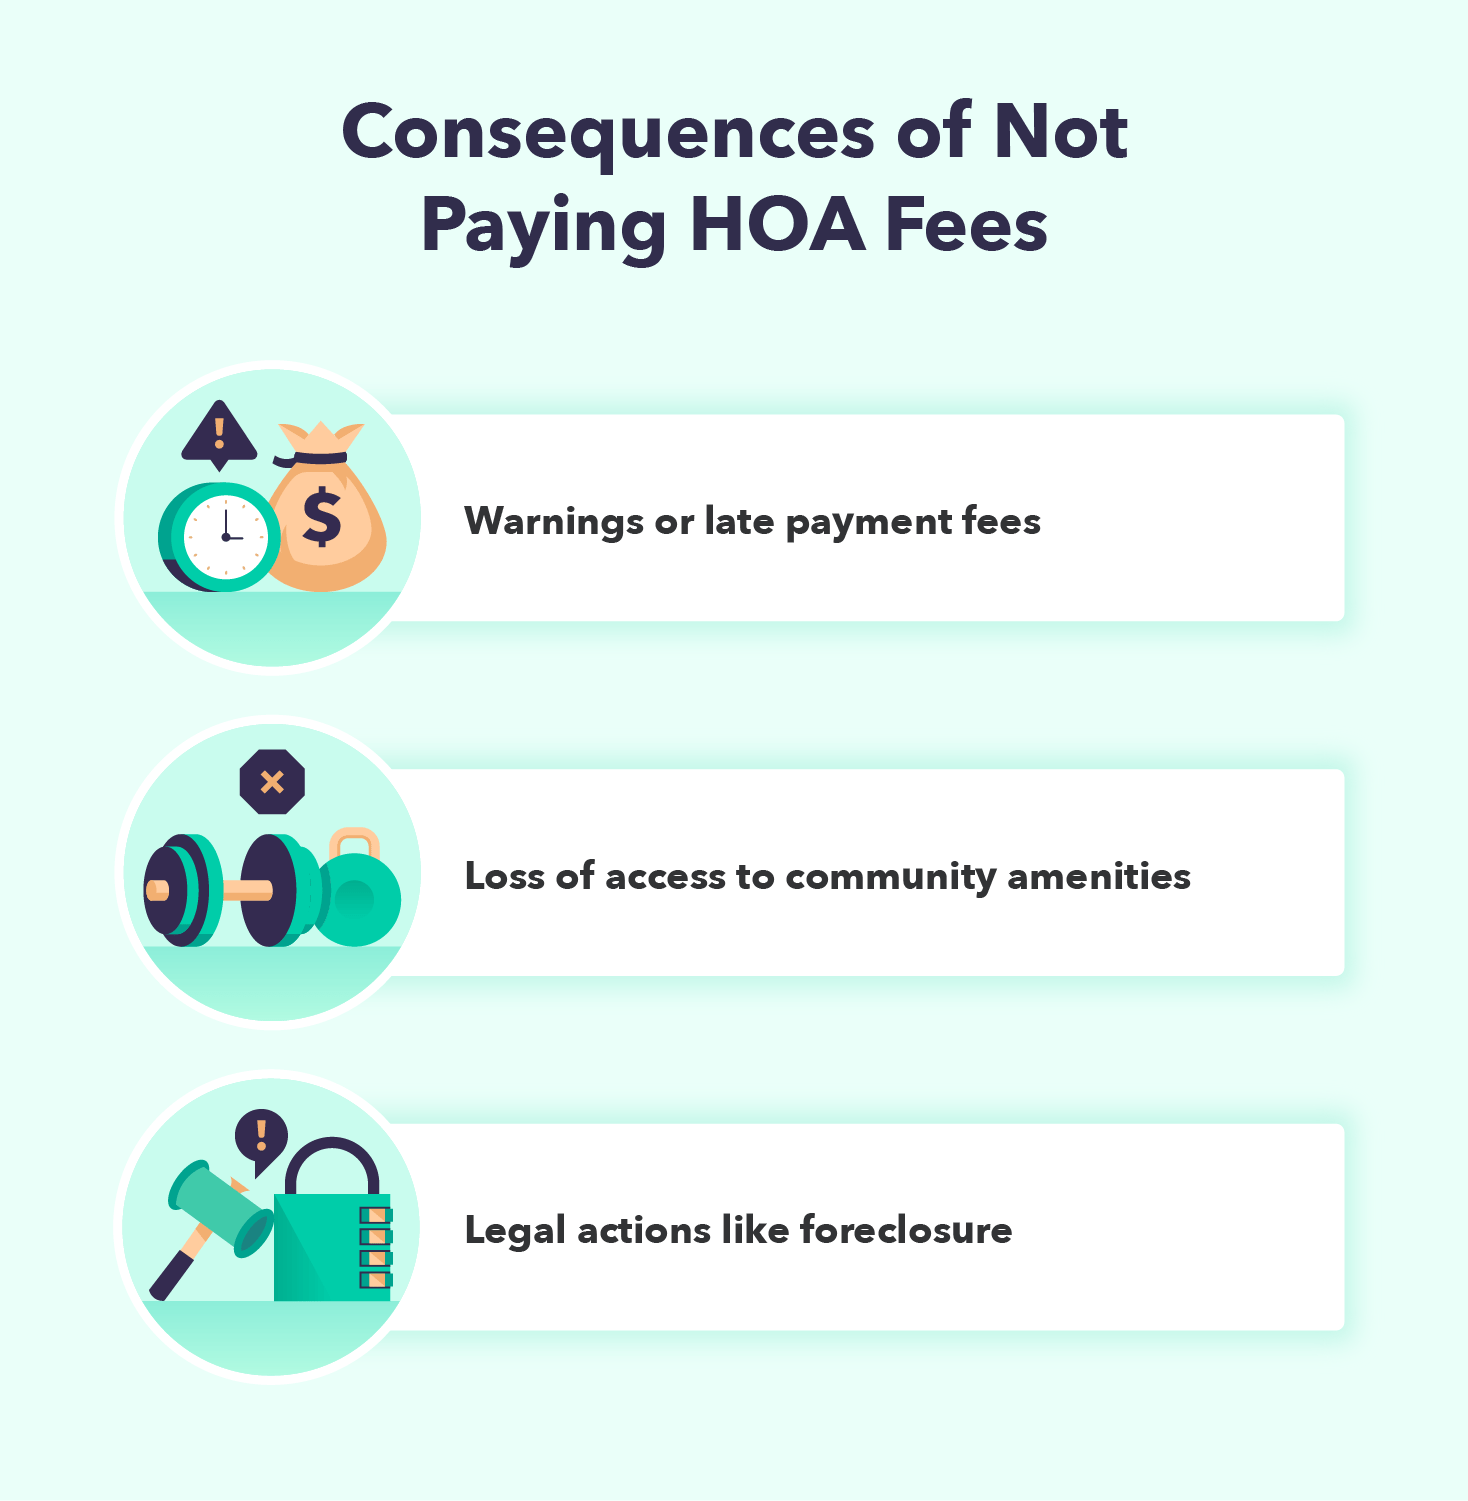 Consequences of not paying HOA fees could include warnings or late payment fees, loss of access to community amenities, or legal actions like foreclosure. 